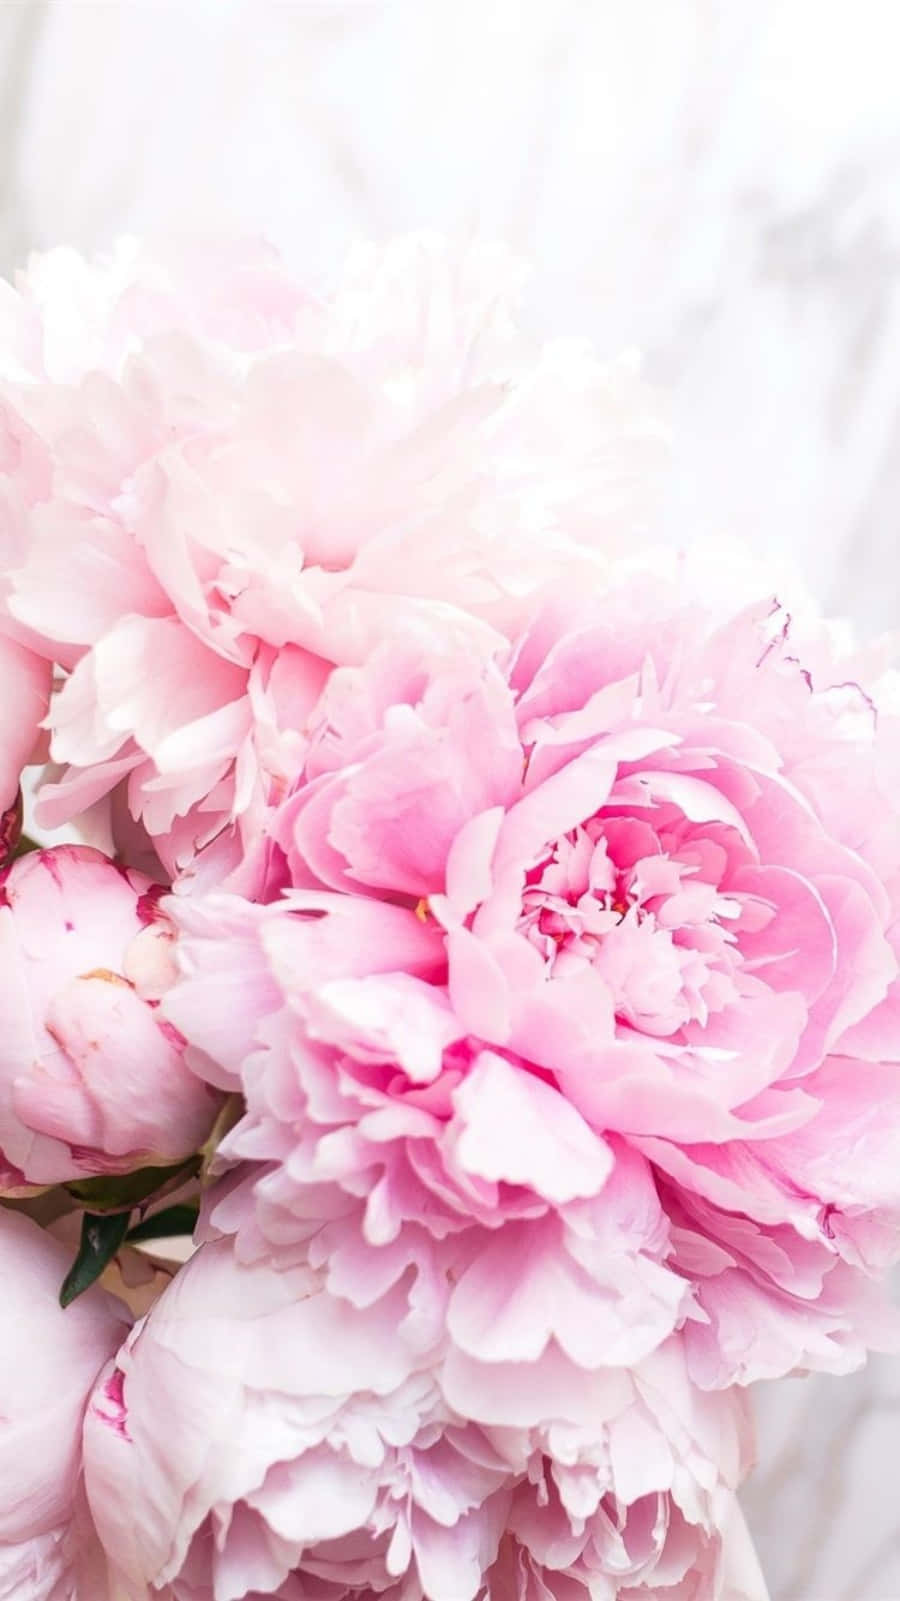 Pink Peonies In A Vase On A Marble Table Wallpaper